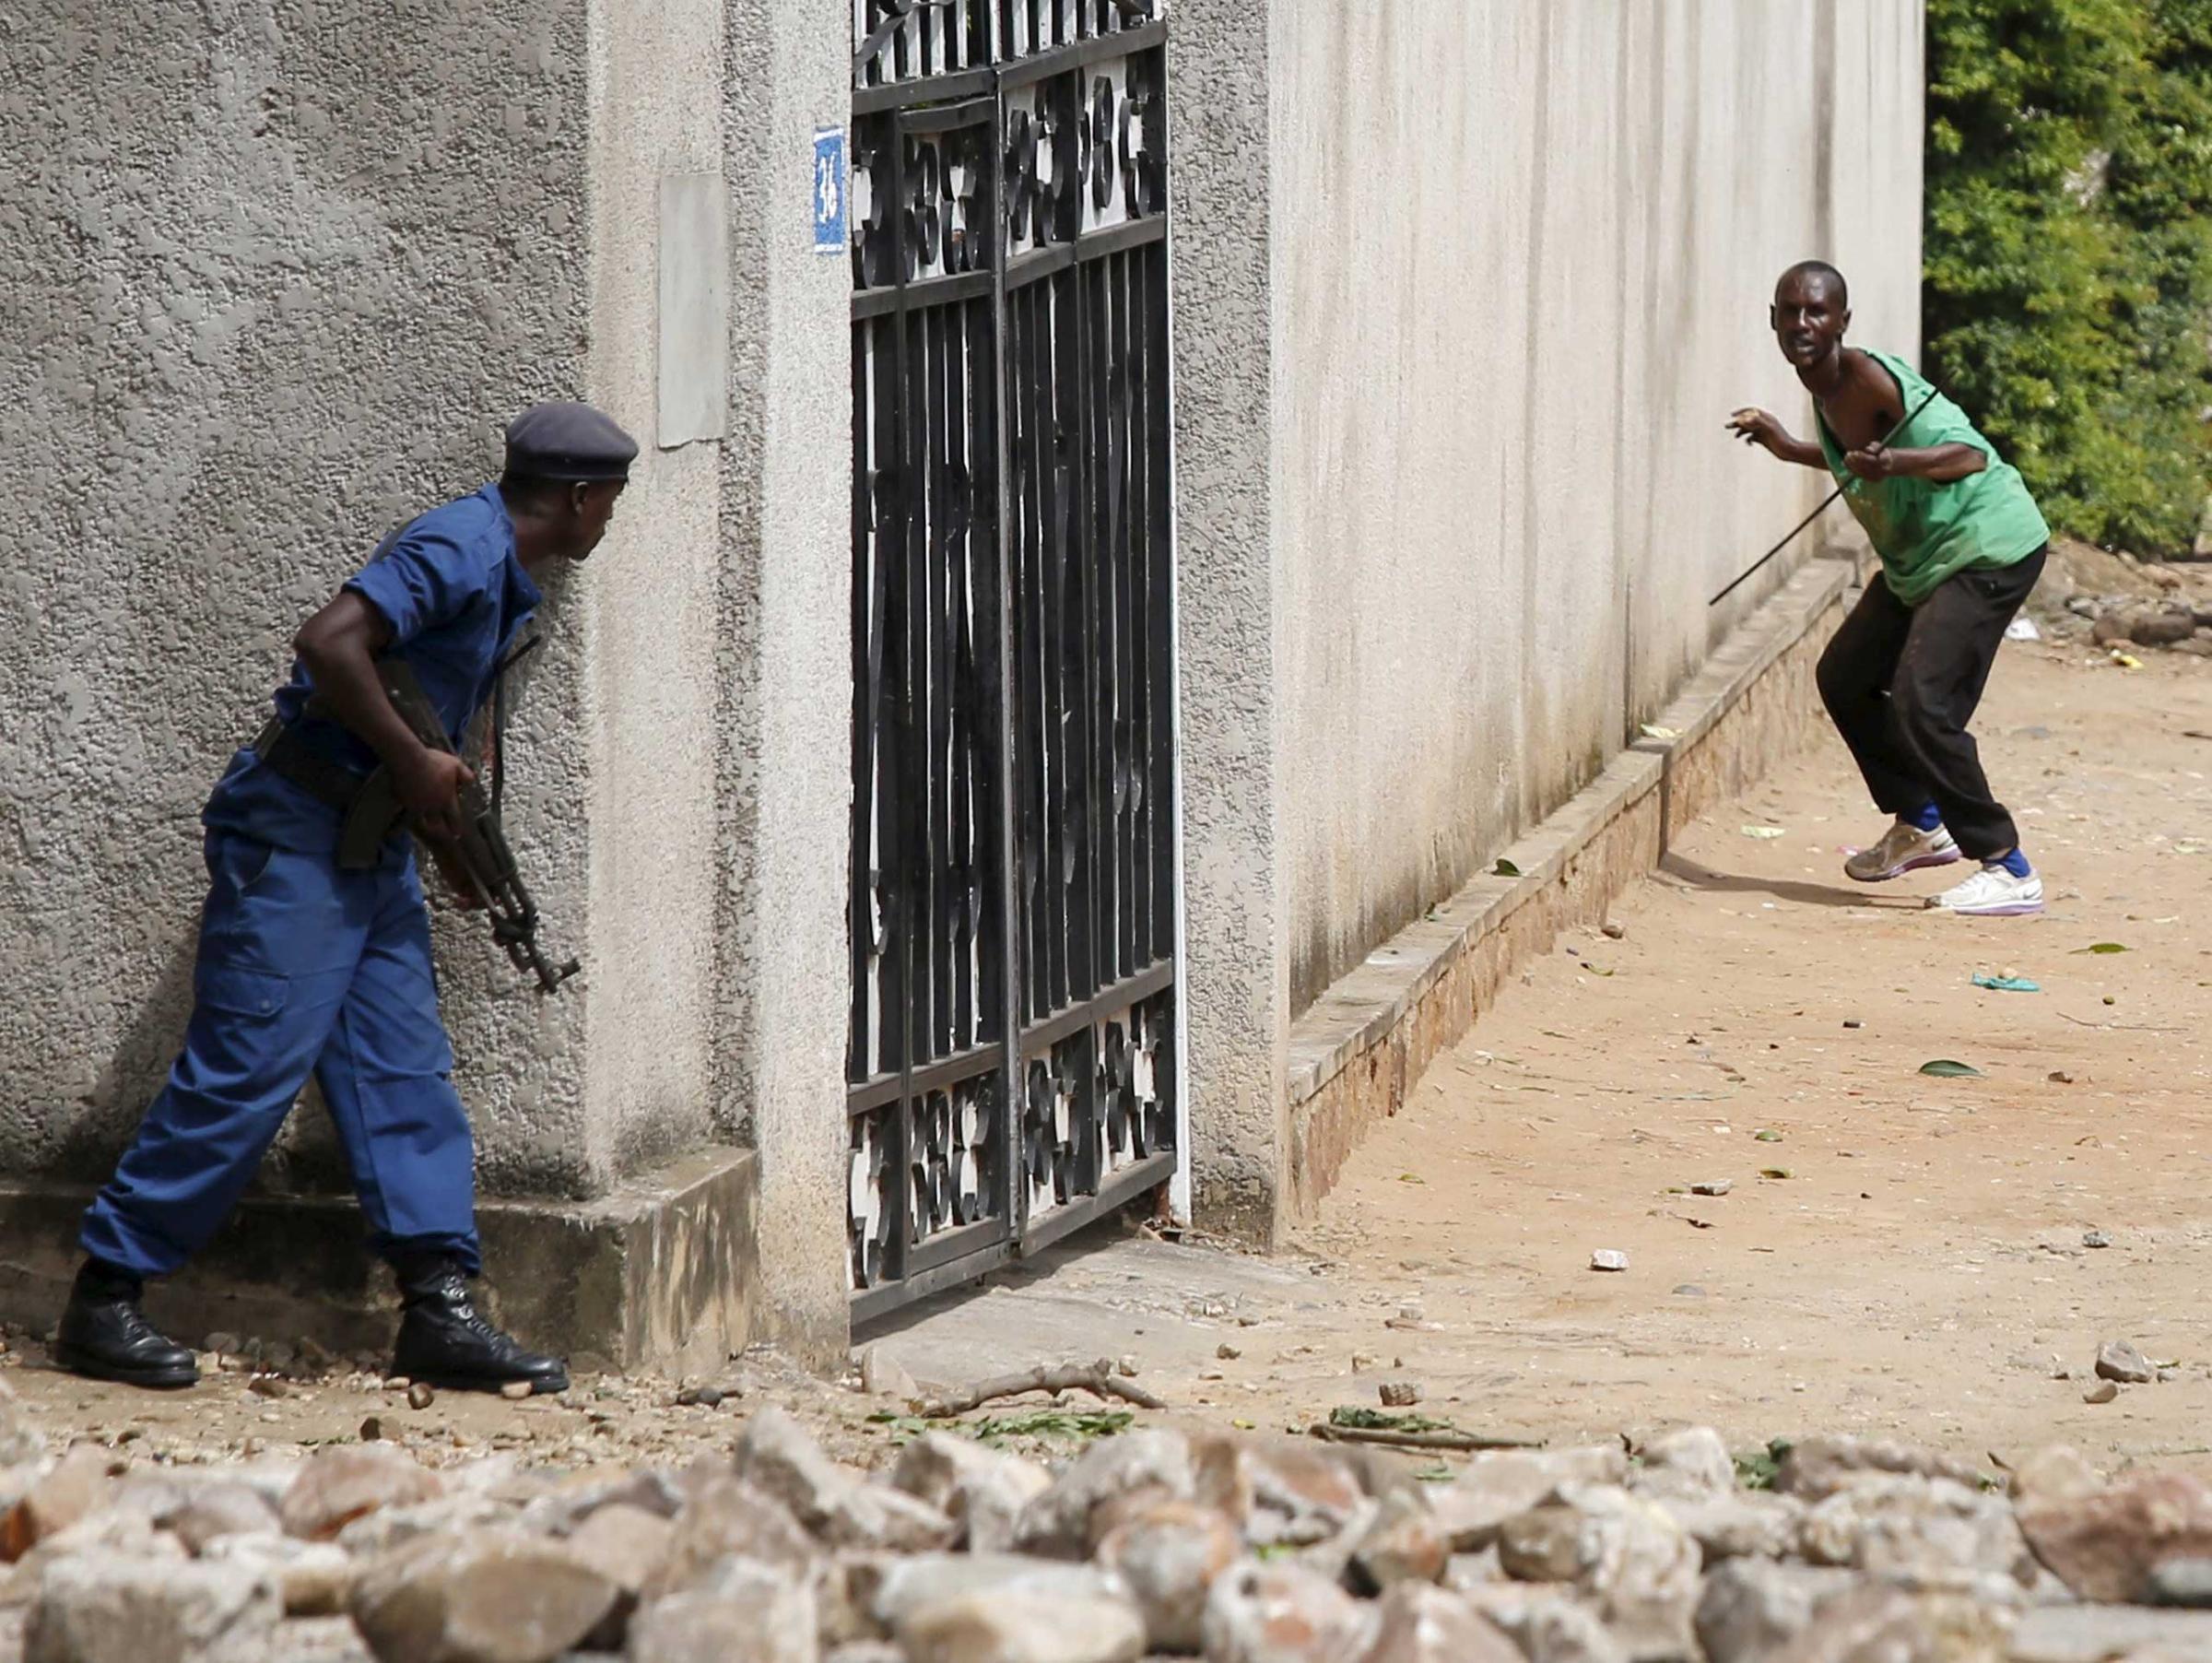 Policemen clash with protesters near a parliament building during a protest against Burundian President Pierre Nkurunziza's decision to run for a third term in Bujumbura on May 13, 2015.